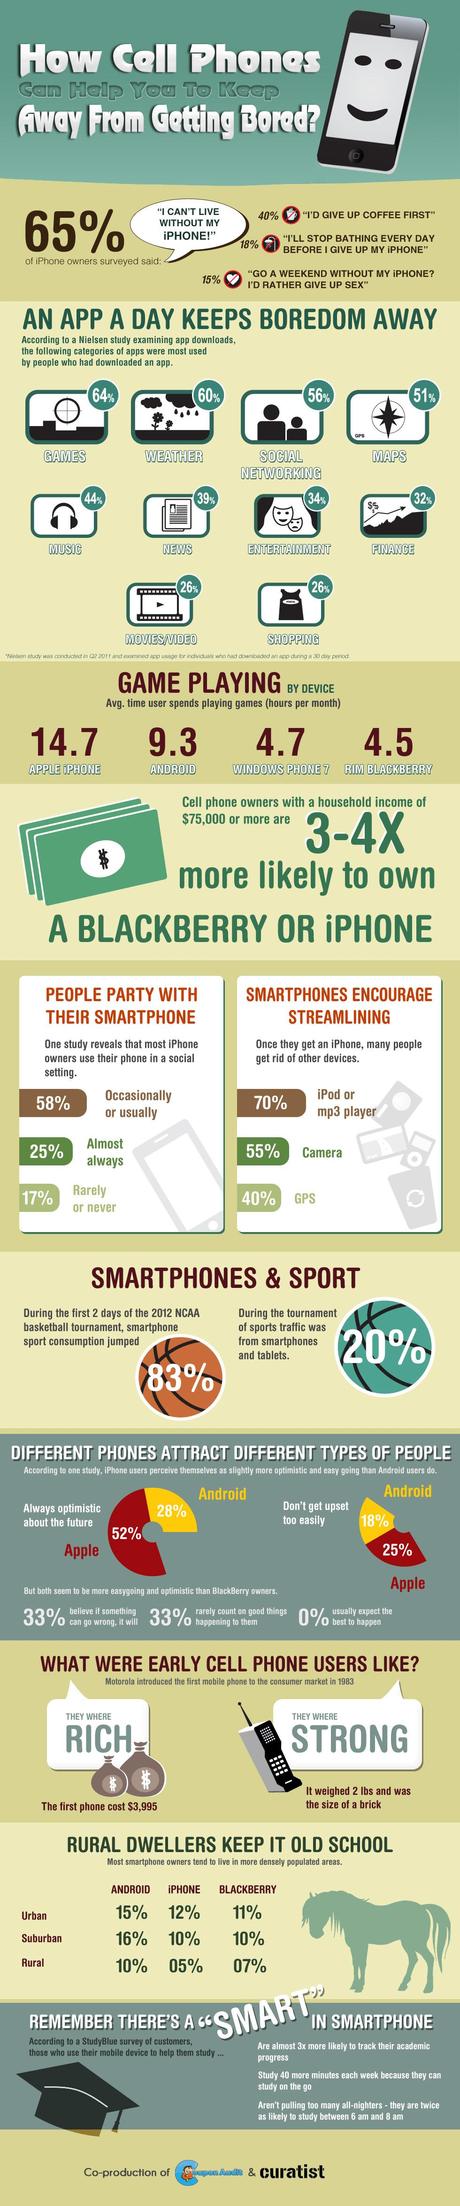 How Cell Phones Can Help You To Keep Away From Getting Bored?